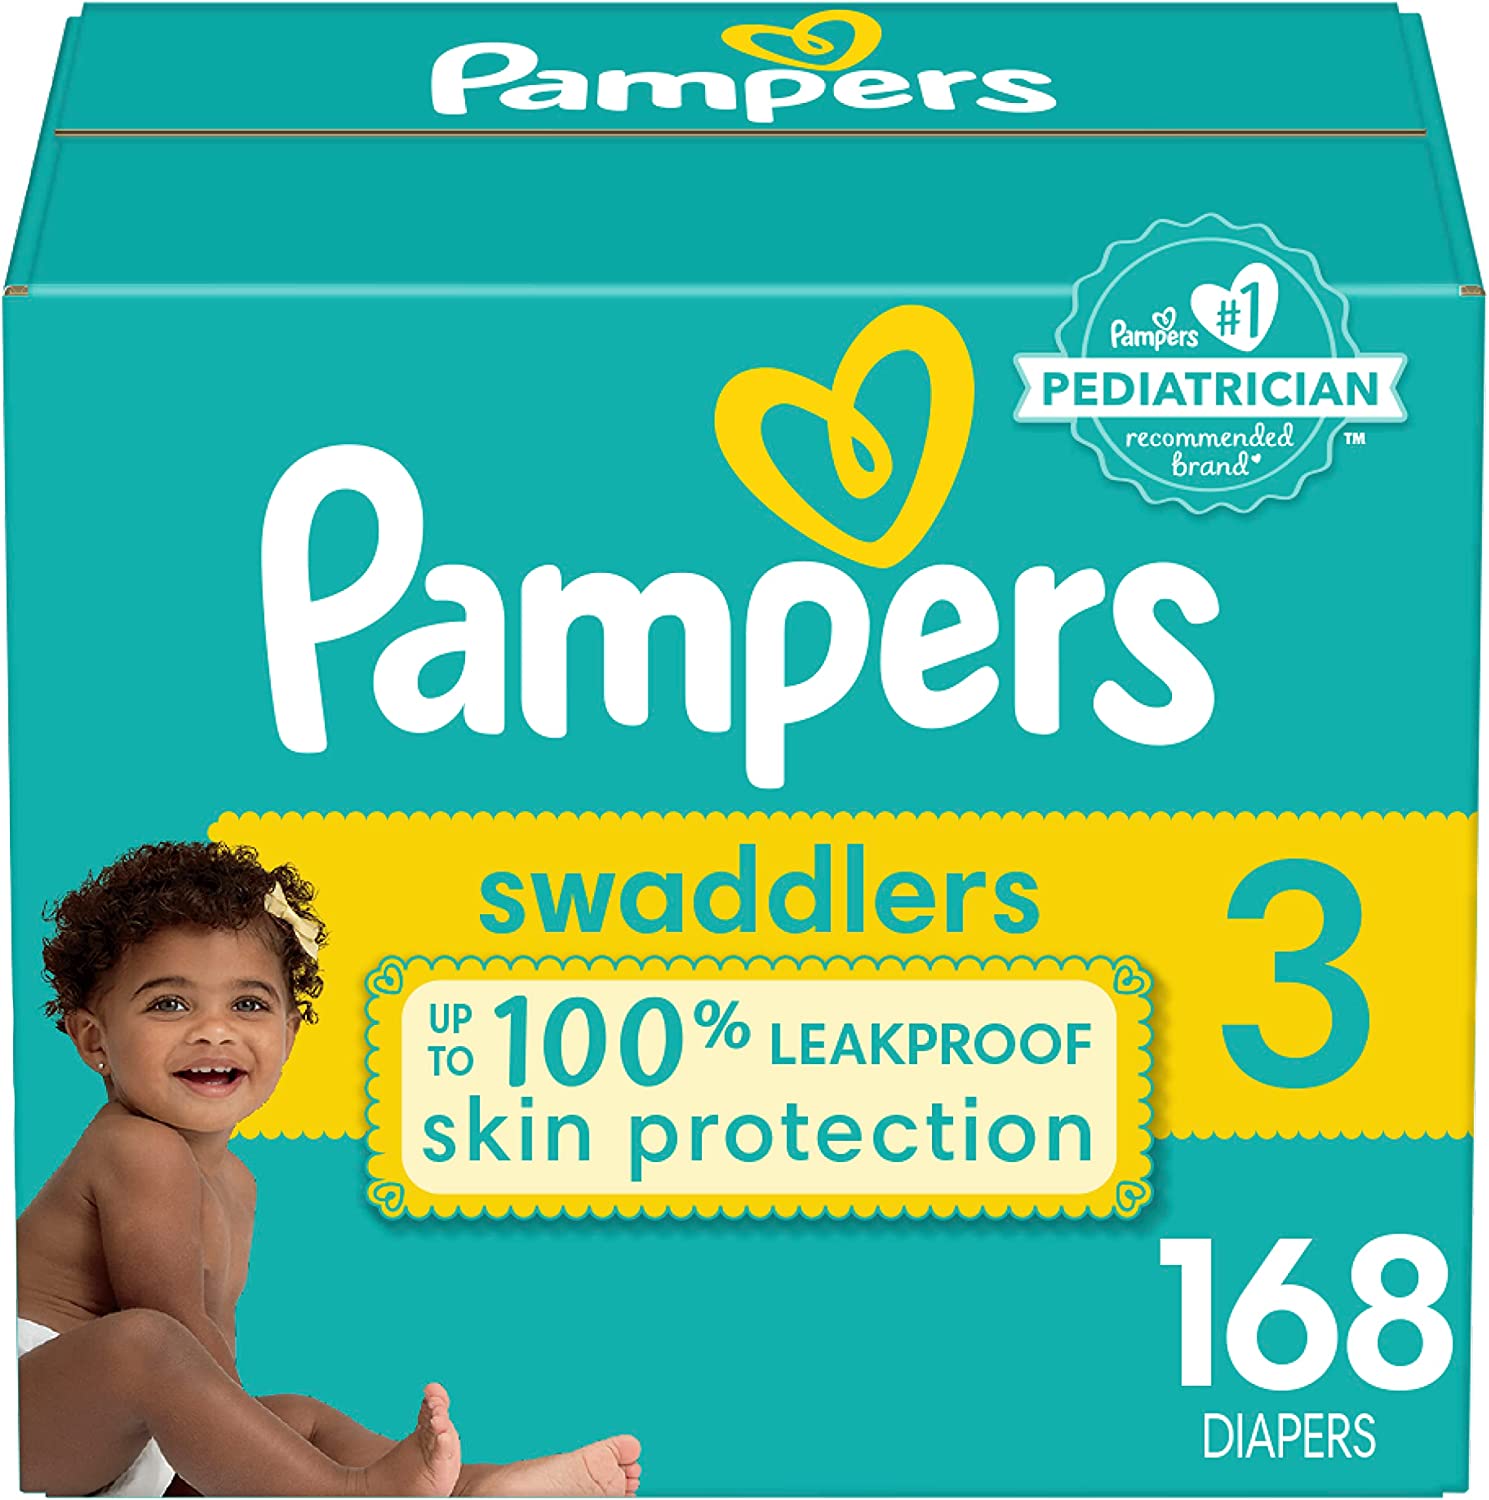 Diapers Size 3, 168 Count – Pampers Swaddlers Disposable Baby Diapers (Packaging & Prints May Vary)